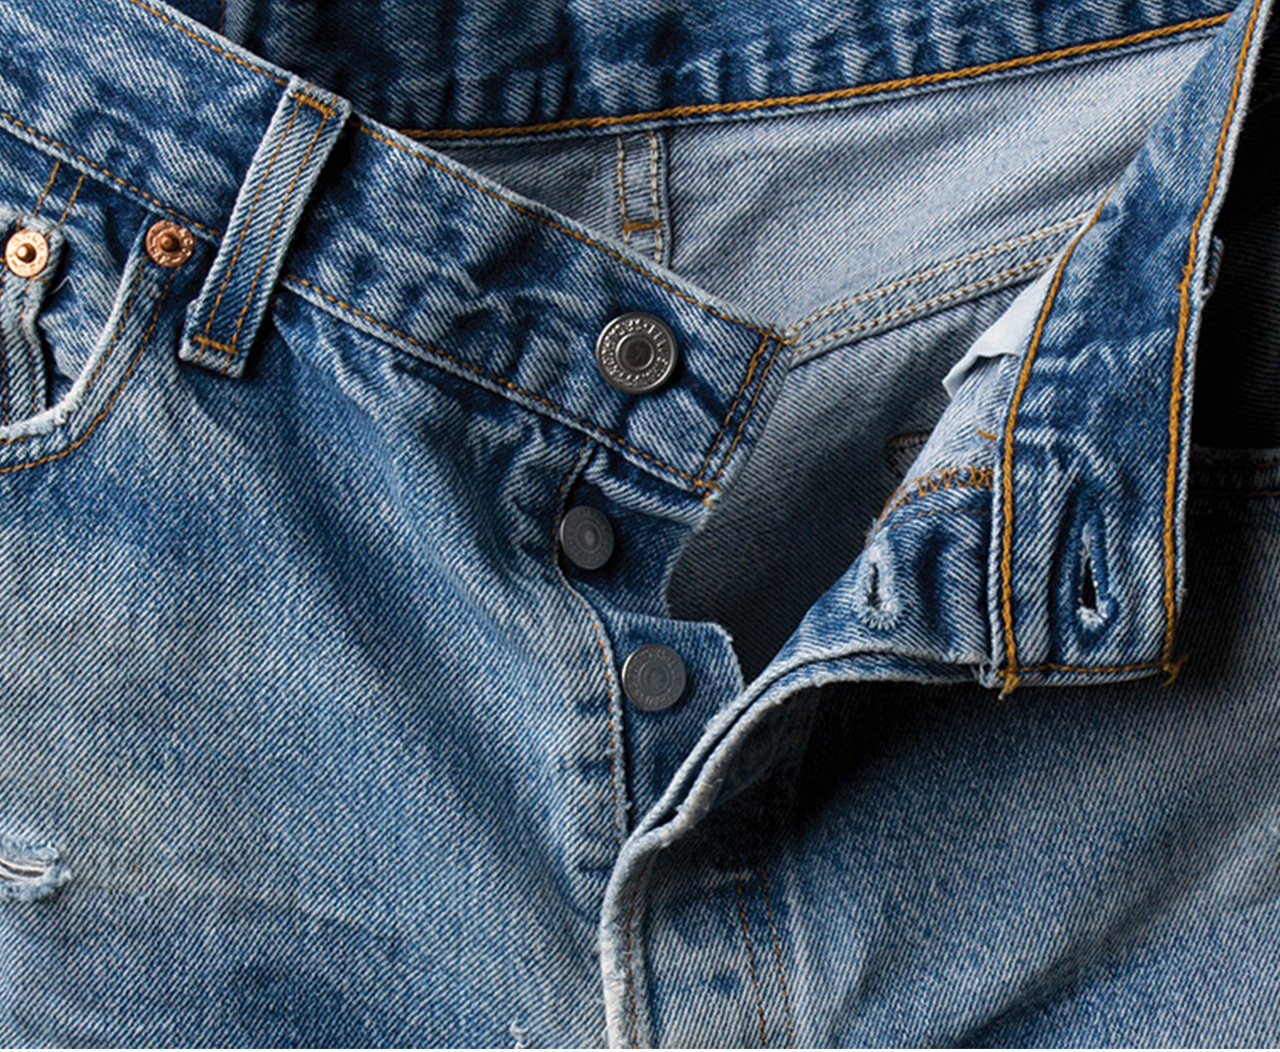 Best Button Fly Jeans | Where Are They | Fashion Blog by Apparel Search